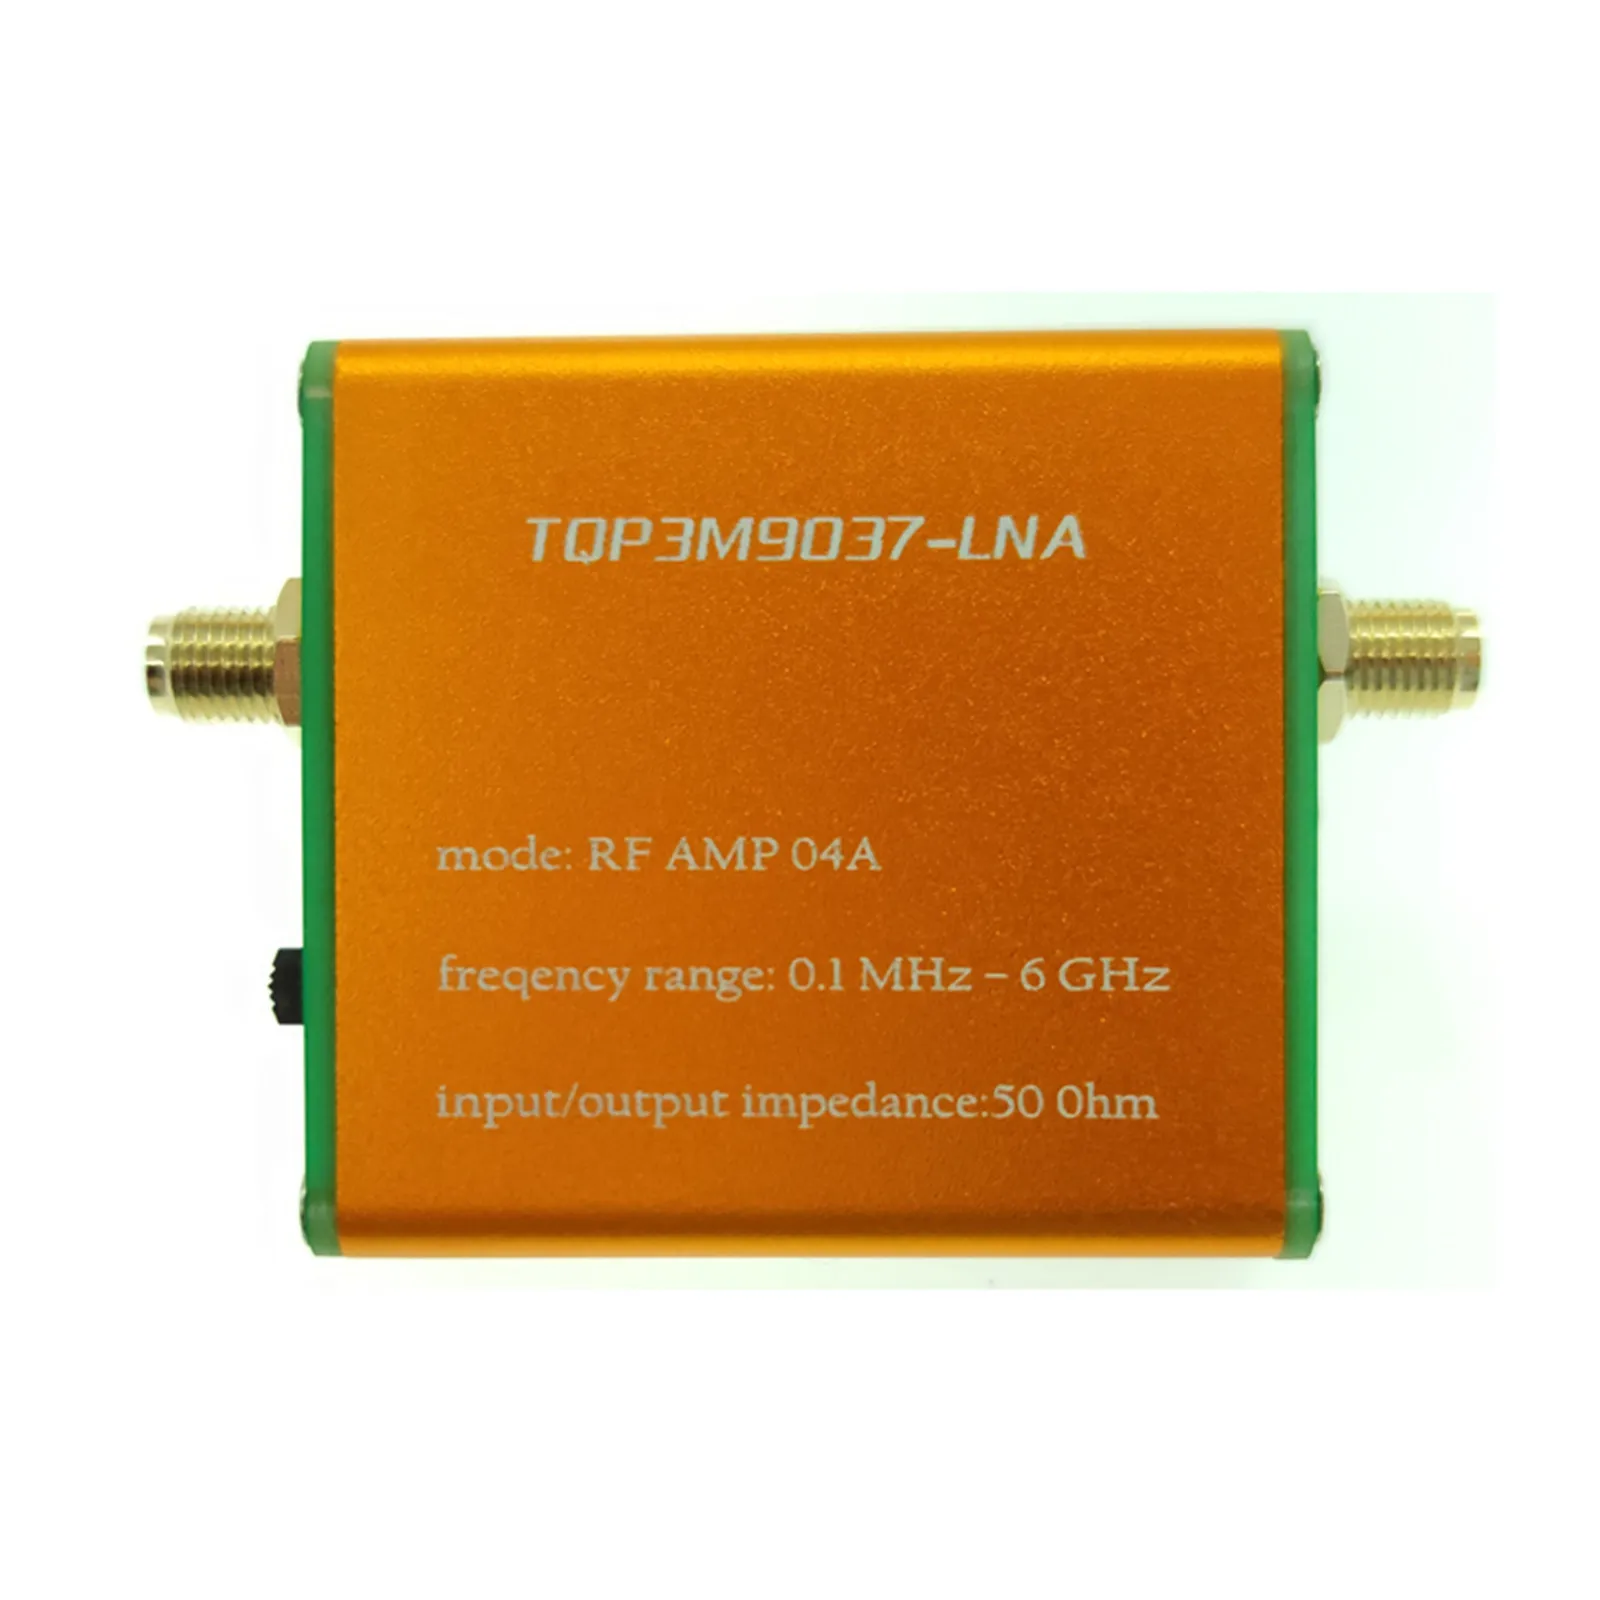 

100k-6GHz All-Band Low Noise Amplifier 50 Ohm Input/output SMA Female Connector Preamplifier